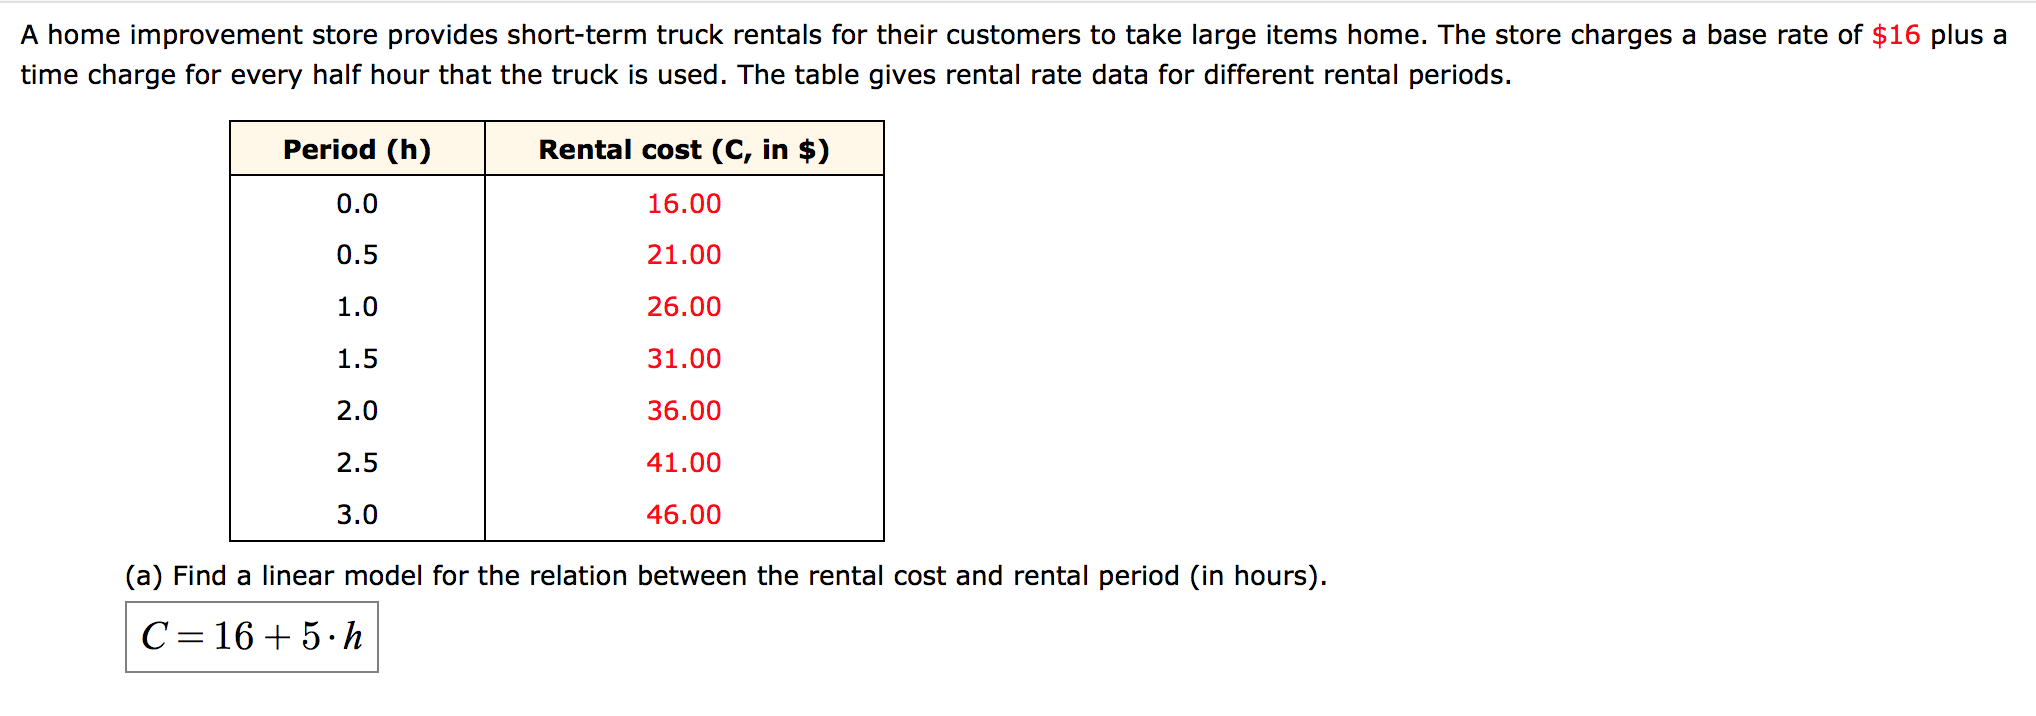 A home improvement store provides short-term truck rentals for their customers to take large items home. The store charges a base rate of $16 plus a
time charge for every half hour that the truck is used. The table gives rental rate data for different rental periods.
Period (h)
Rental cost (C, in $)
0.0
16.00
0.5
21.00
1.0
26.00
1.5
31.00
2.0
36.00
2.5
41.00
3.0
46.00
(a) Find a linear model for the relation between the rental cost and rental period (in hours).
